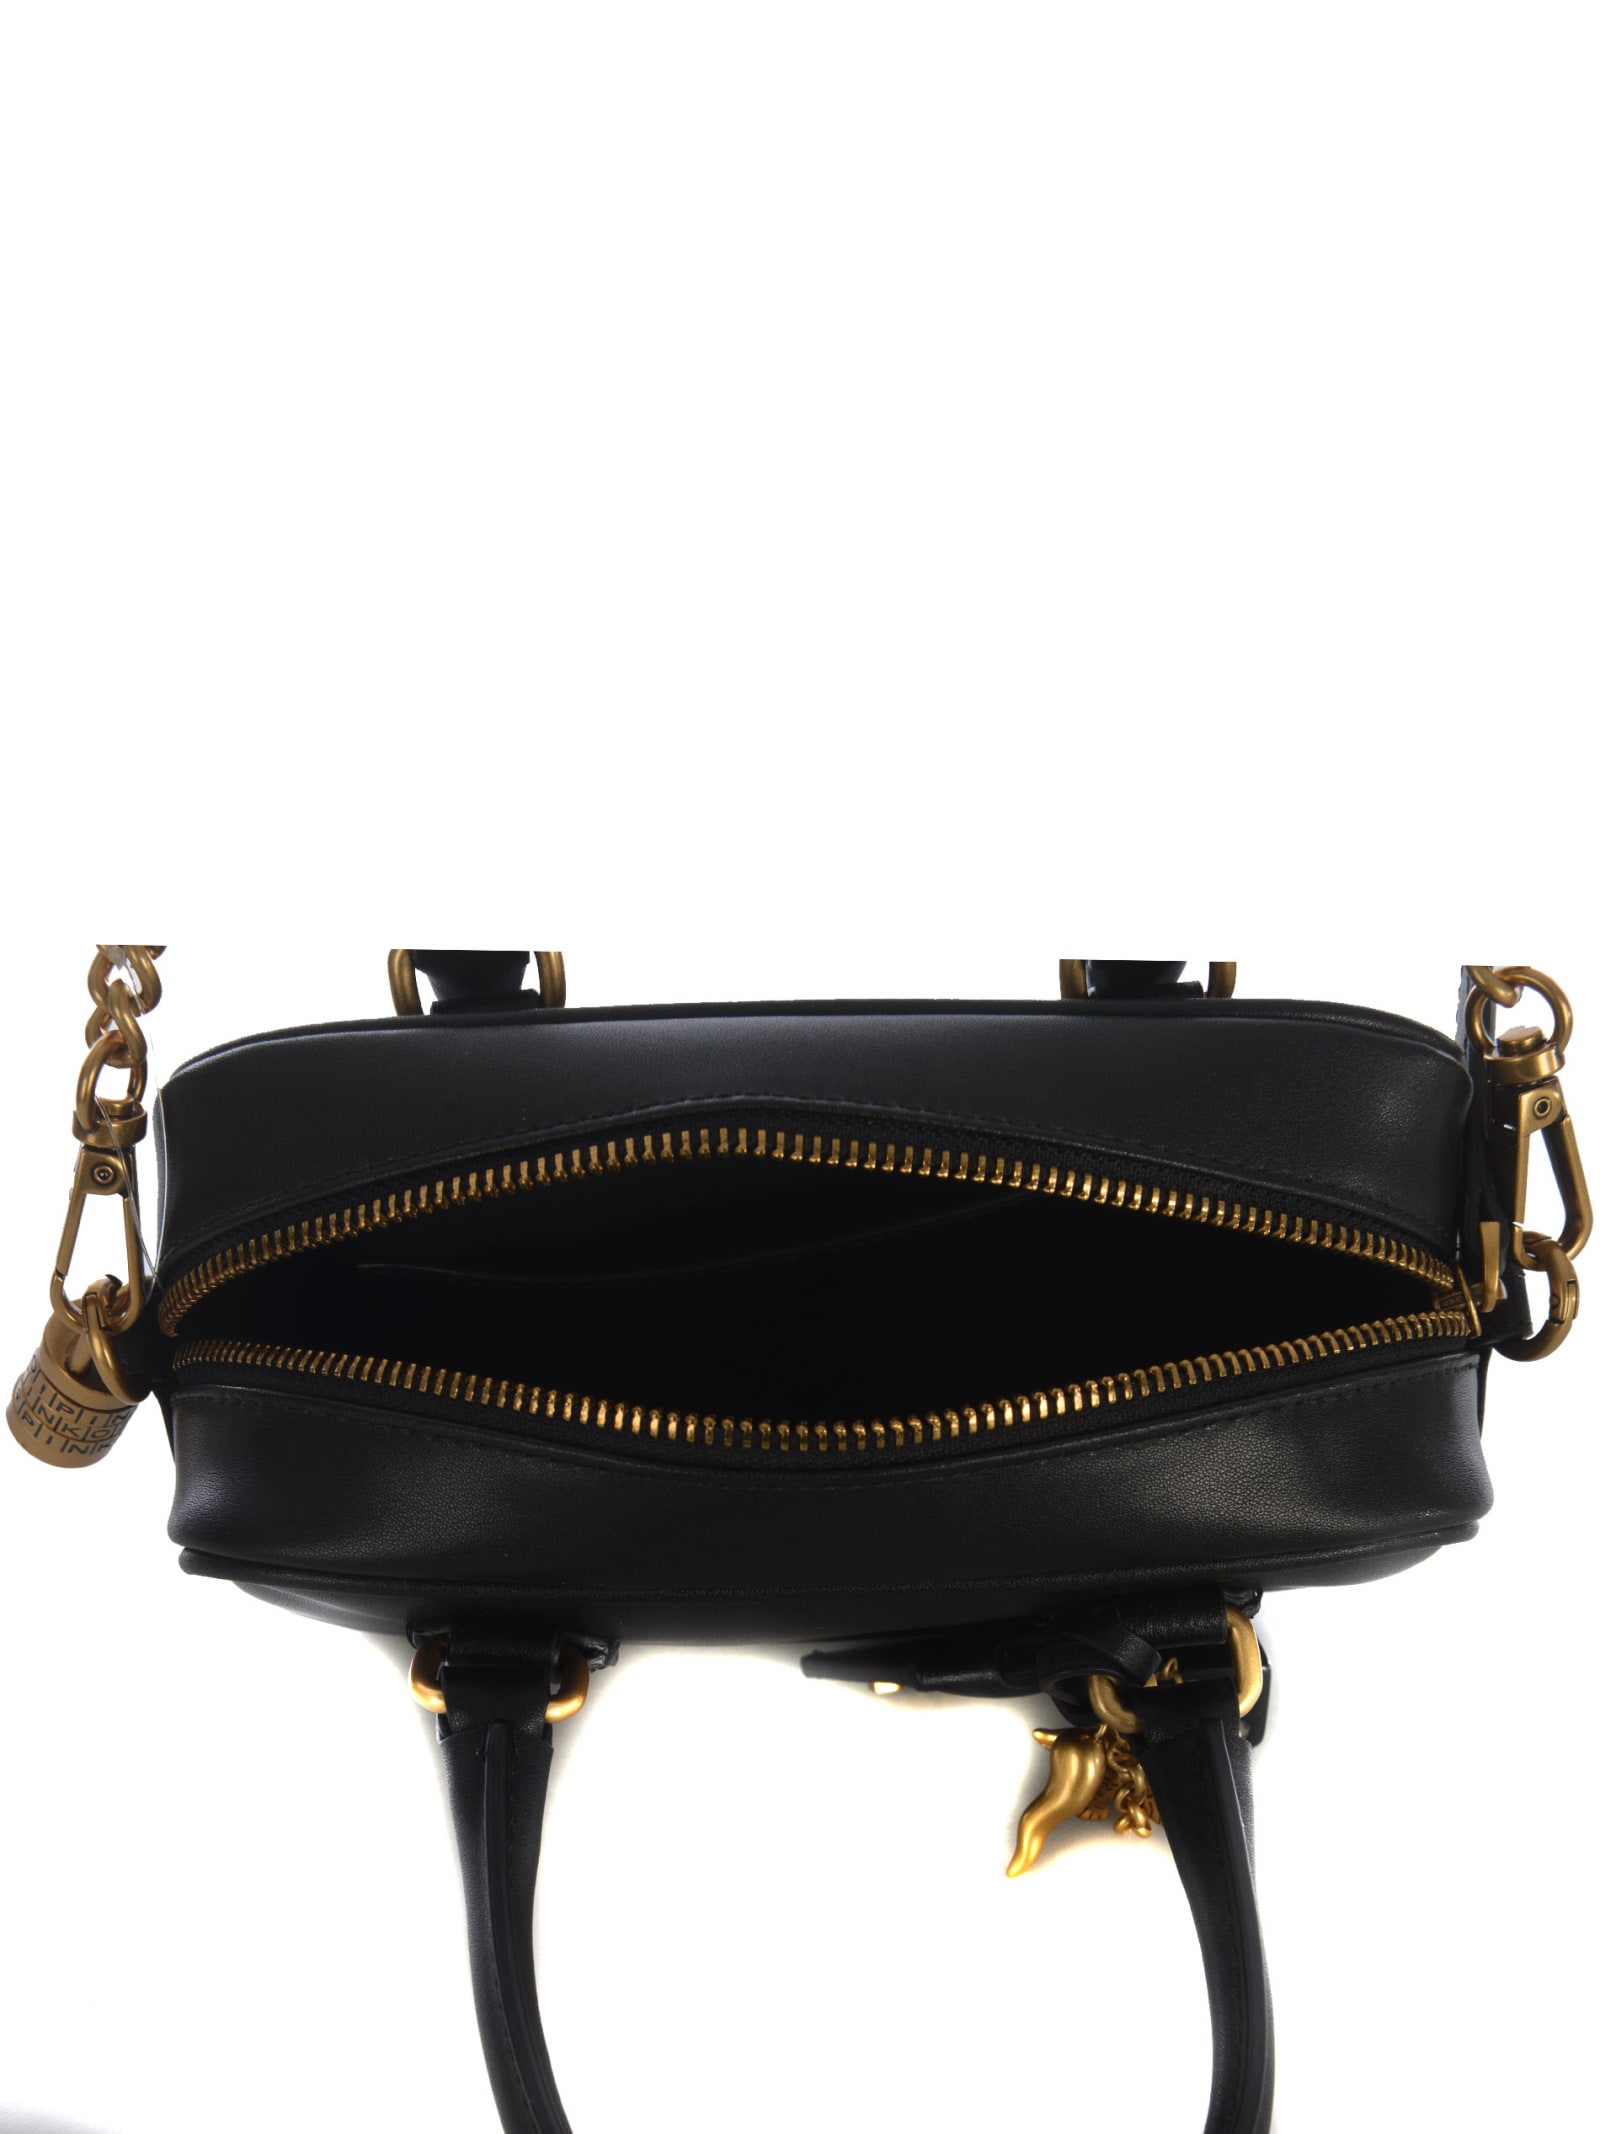 Shop Pinko Bag  Bowling Made Of Leather In Black